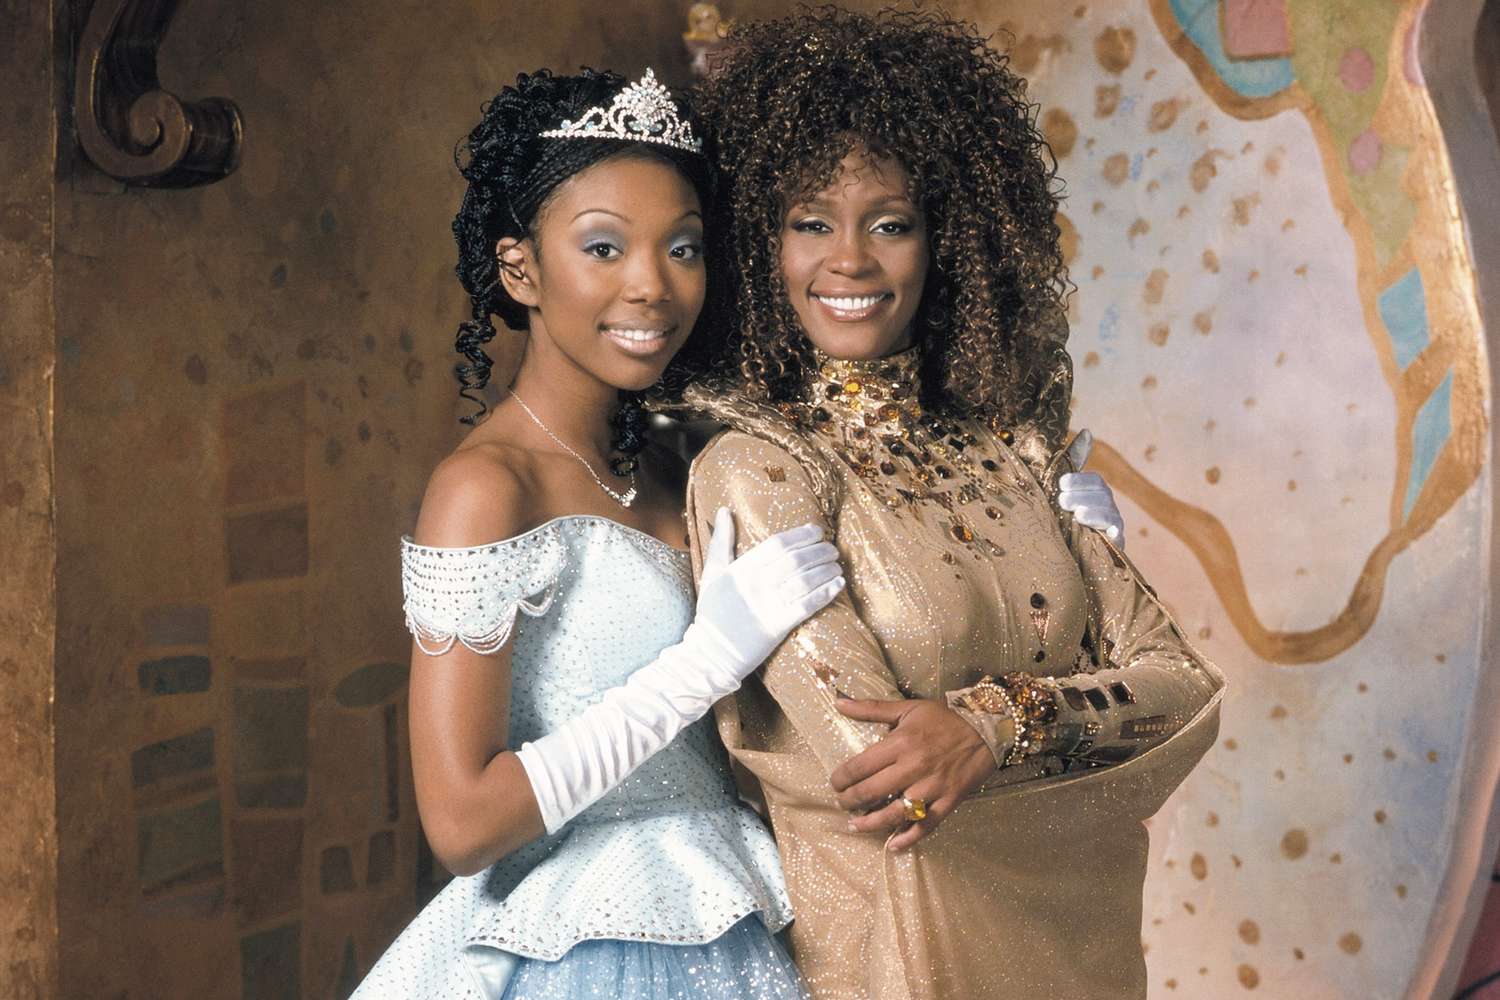 A 25th anniversary special for the Brandy 'Rodgers & Hammerstein's Cinderella' will air on ABC